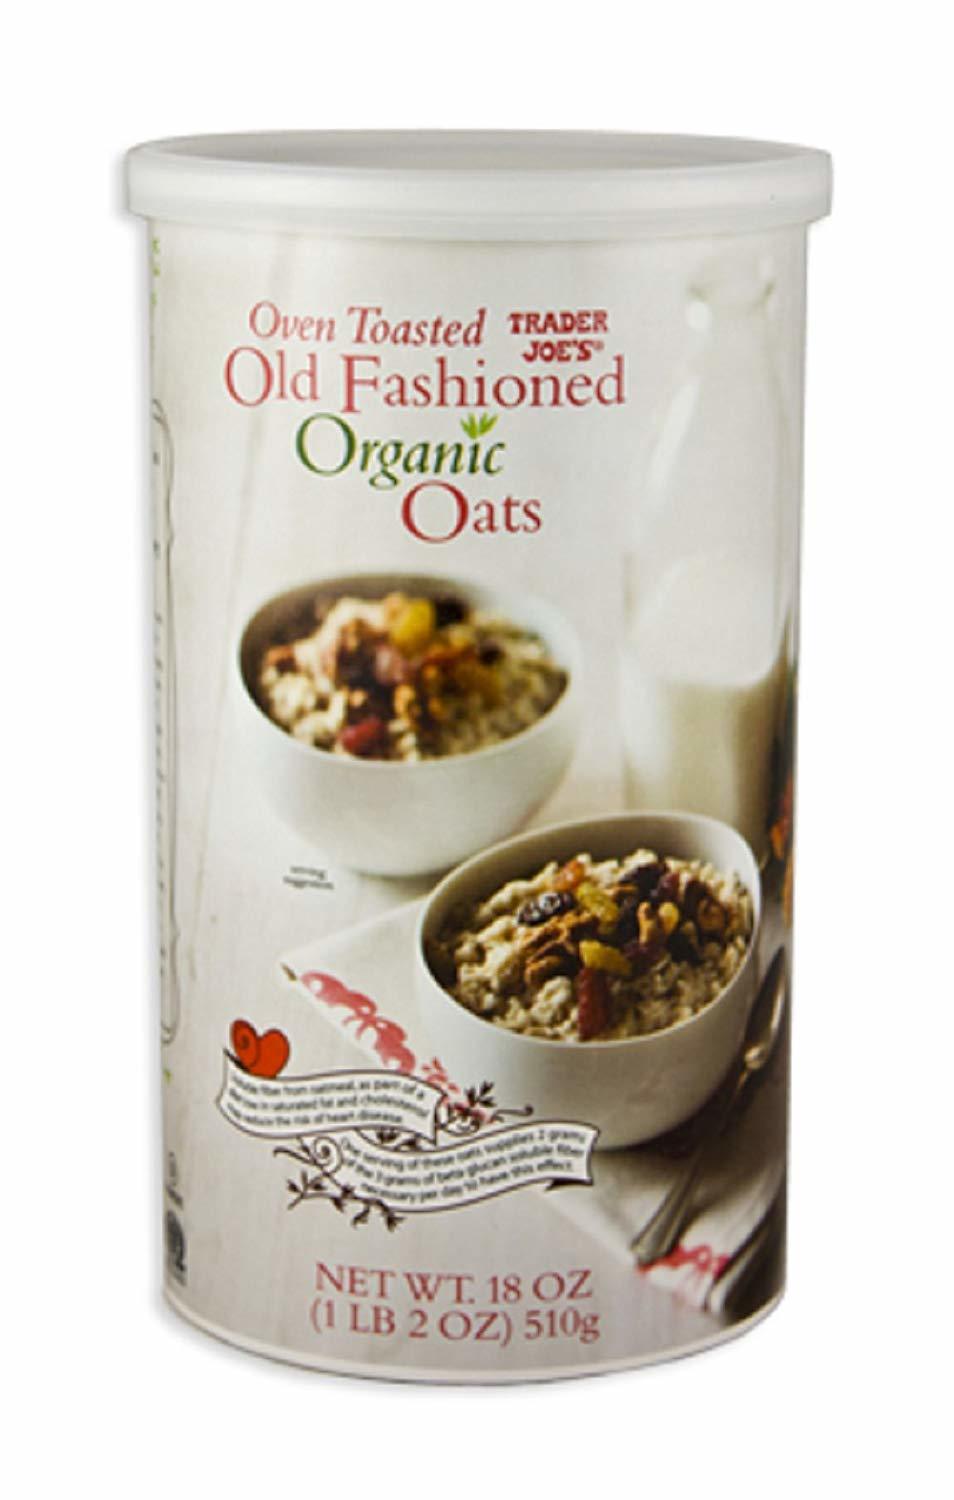 Trader Joe27s Oven Toasted Old Fashioned Organic Oats